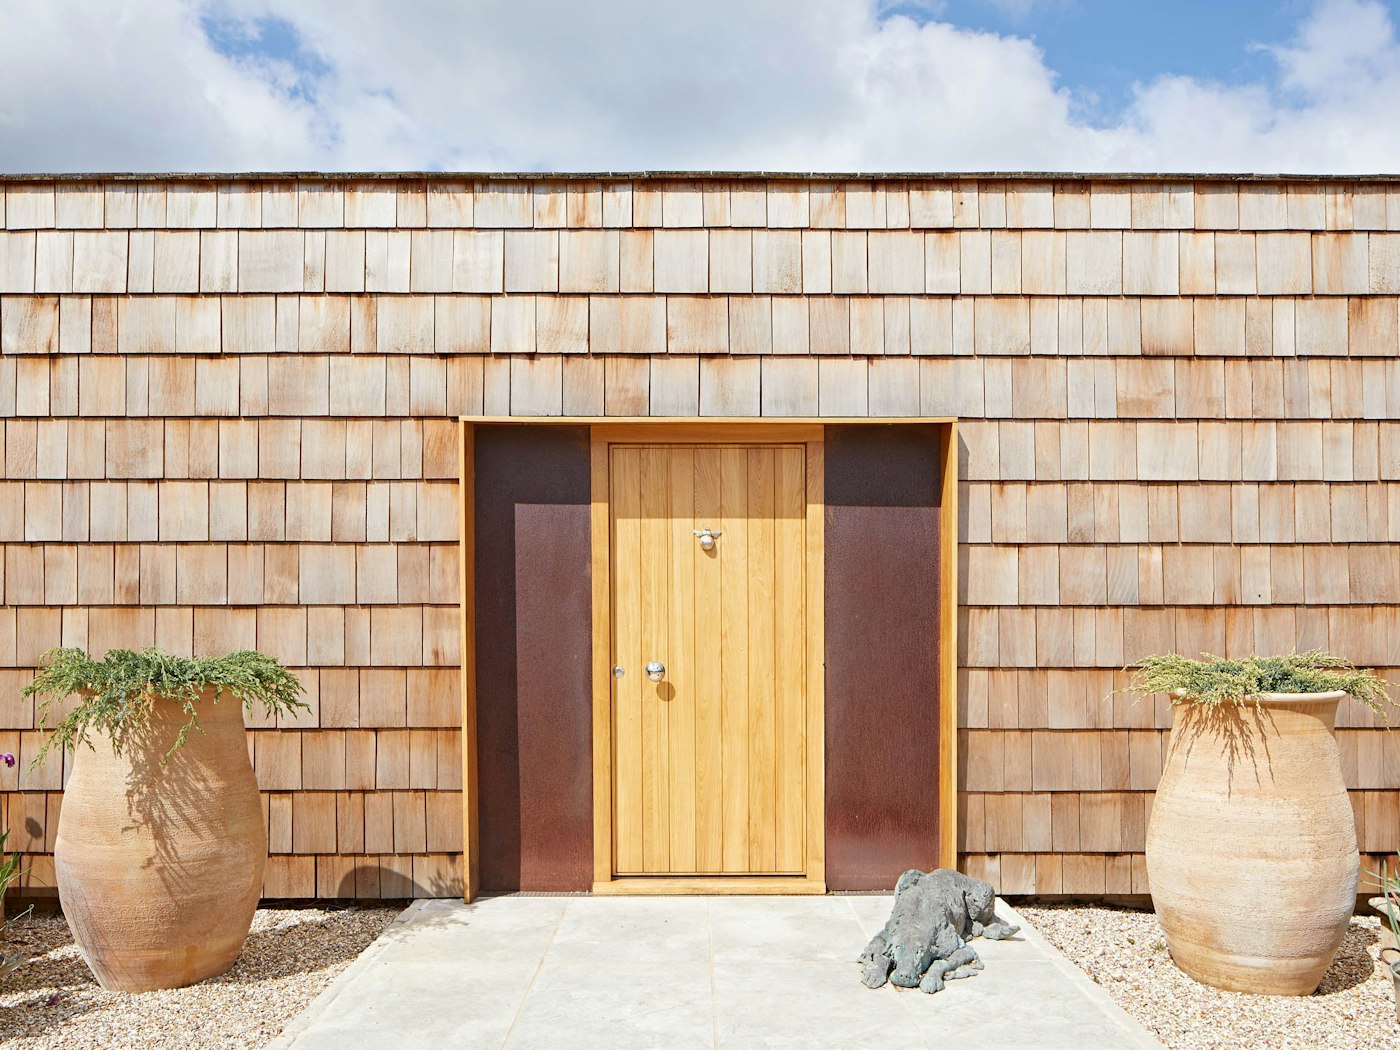 Our Passive oak front door is artfully framed by weathered steel side panels and the unique shingles